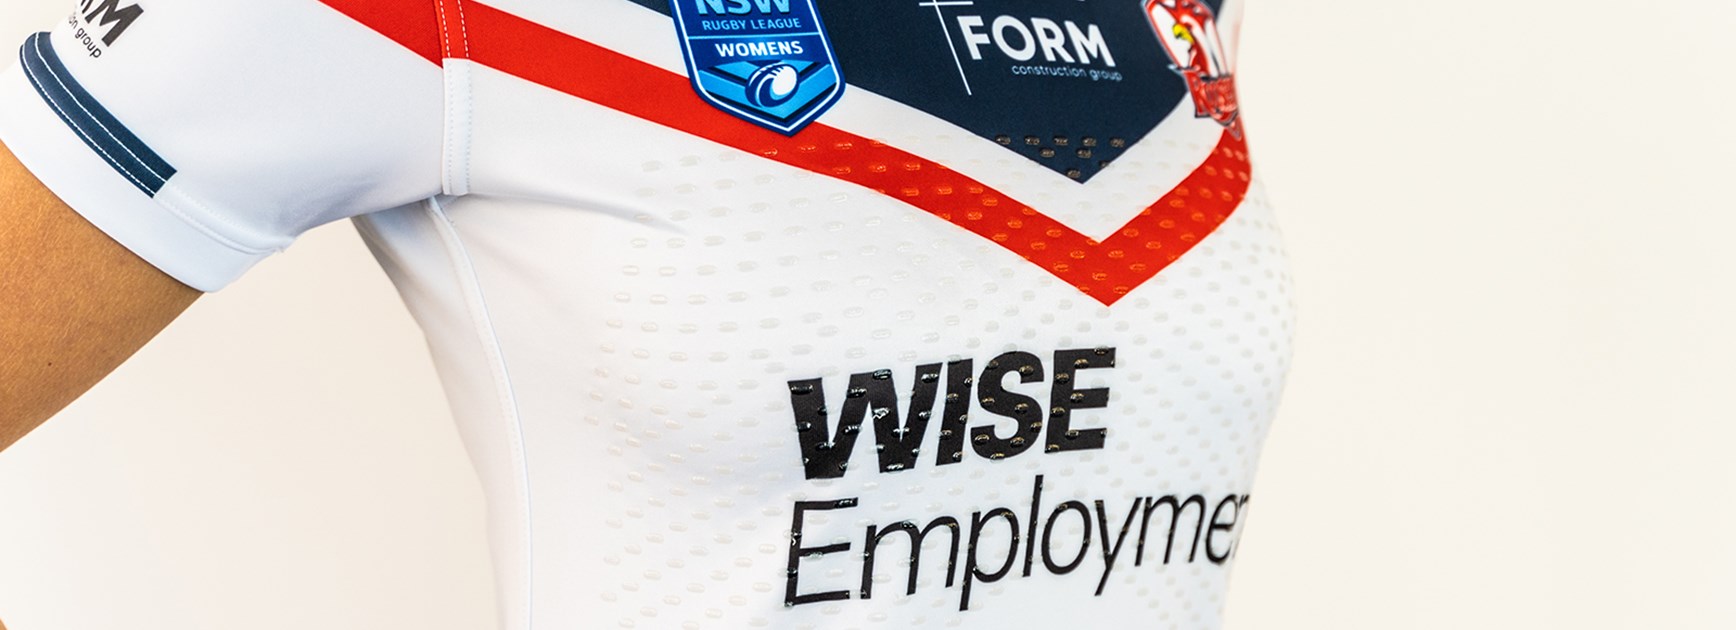 Sydney Roosters Unite with WISE Employment